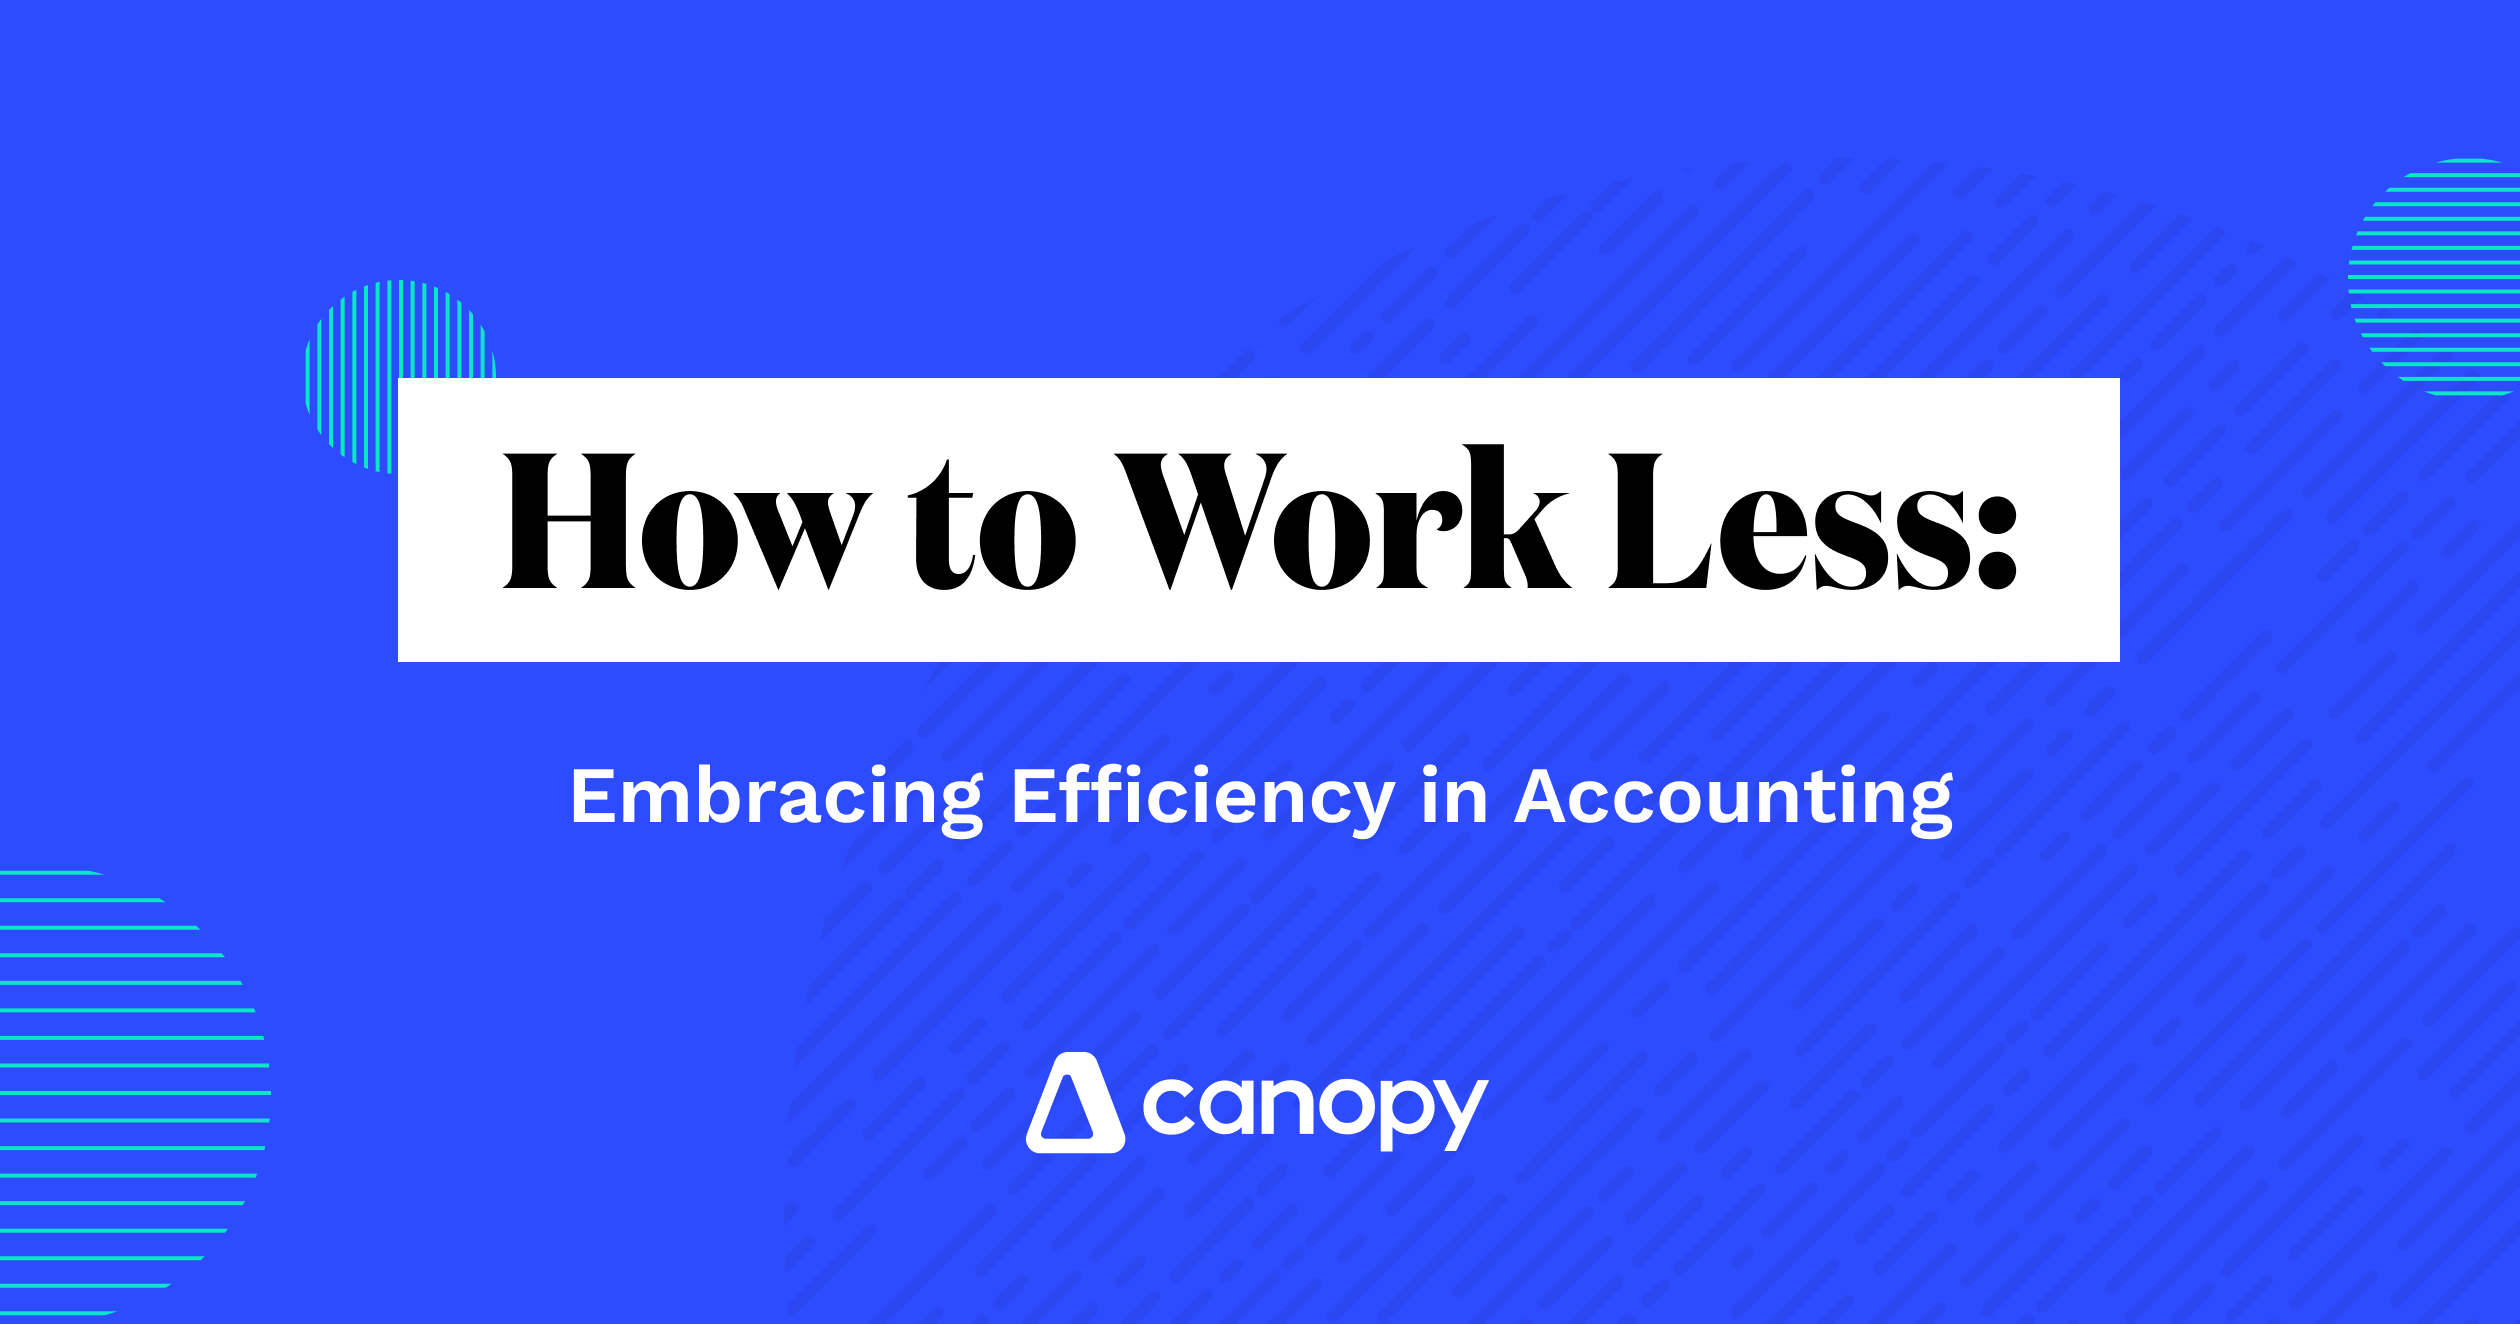 How to Work Less: Embracing Efficiency in Accounting